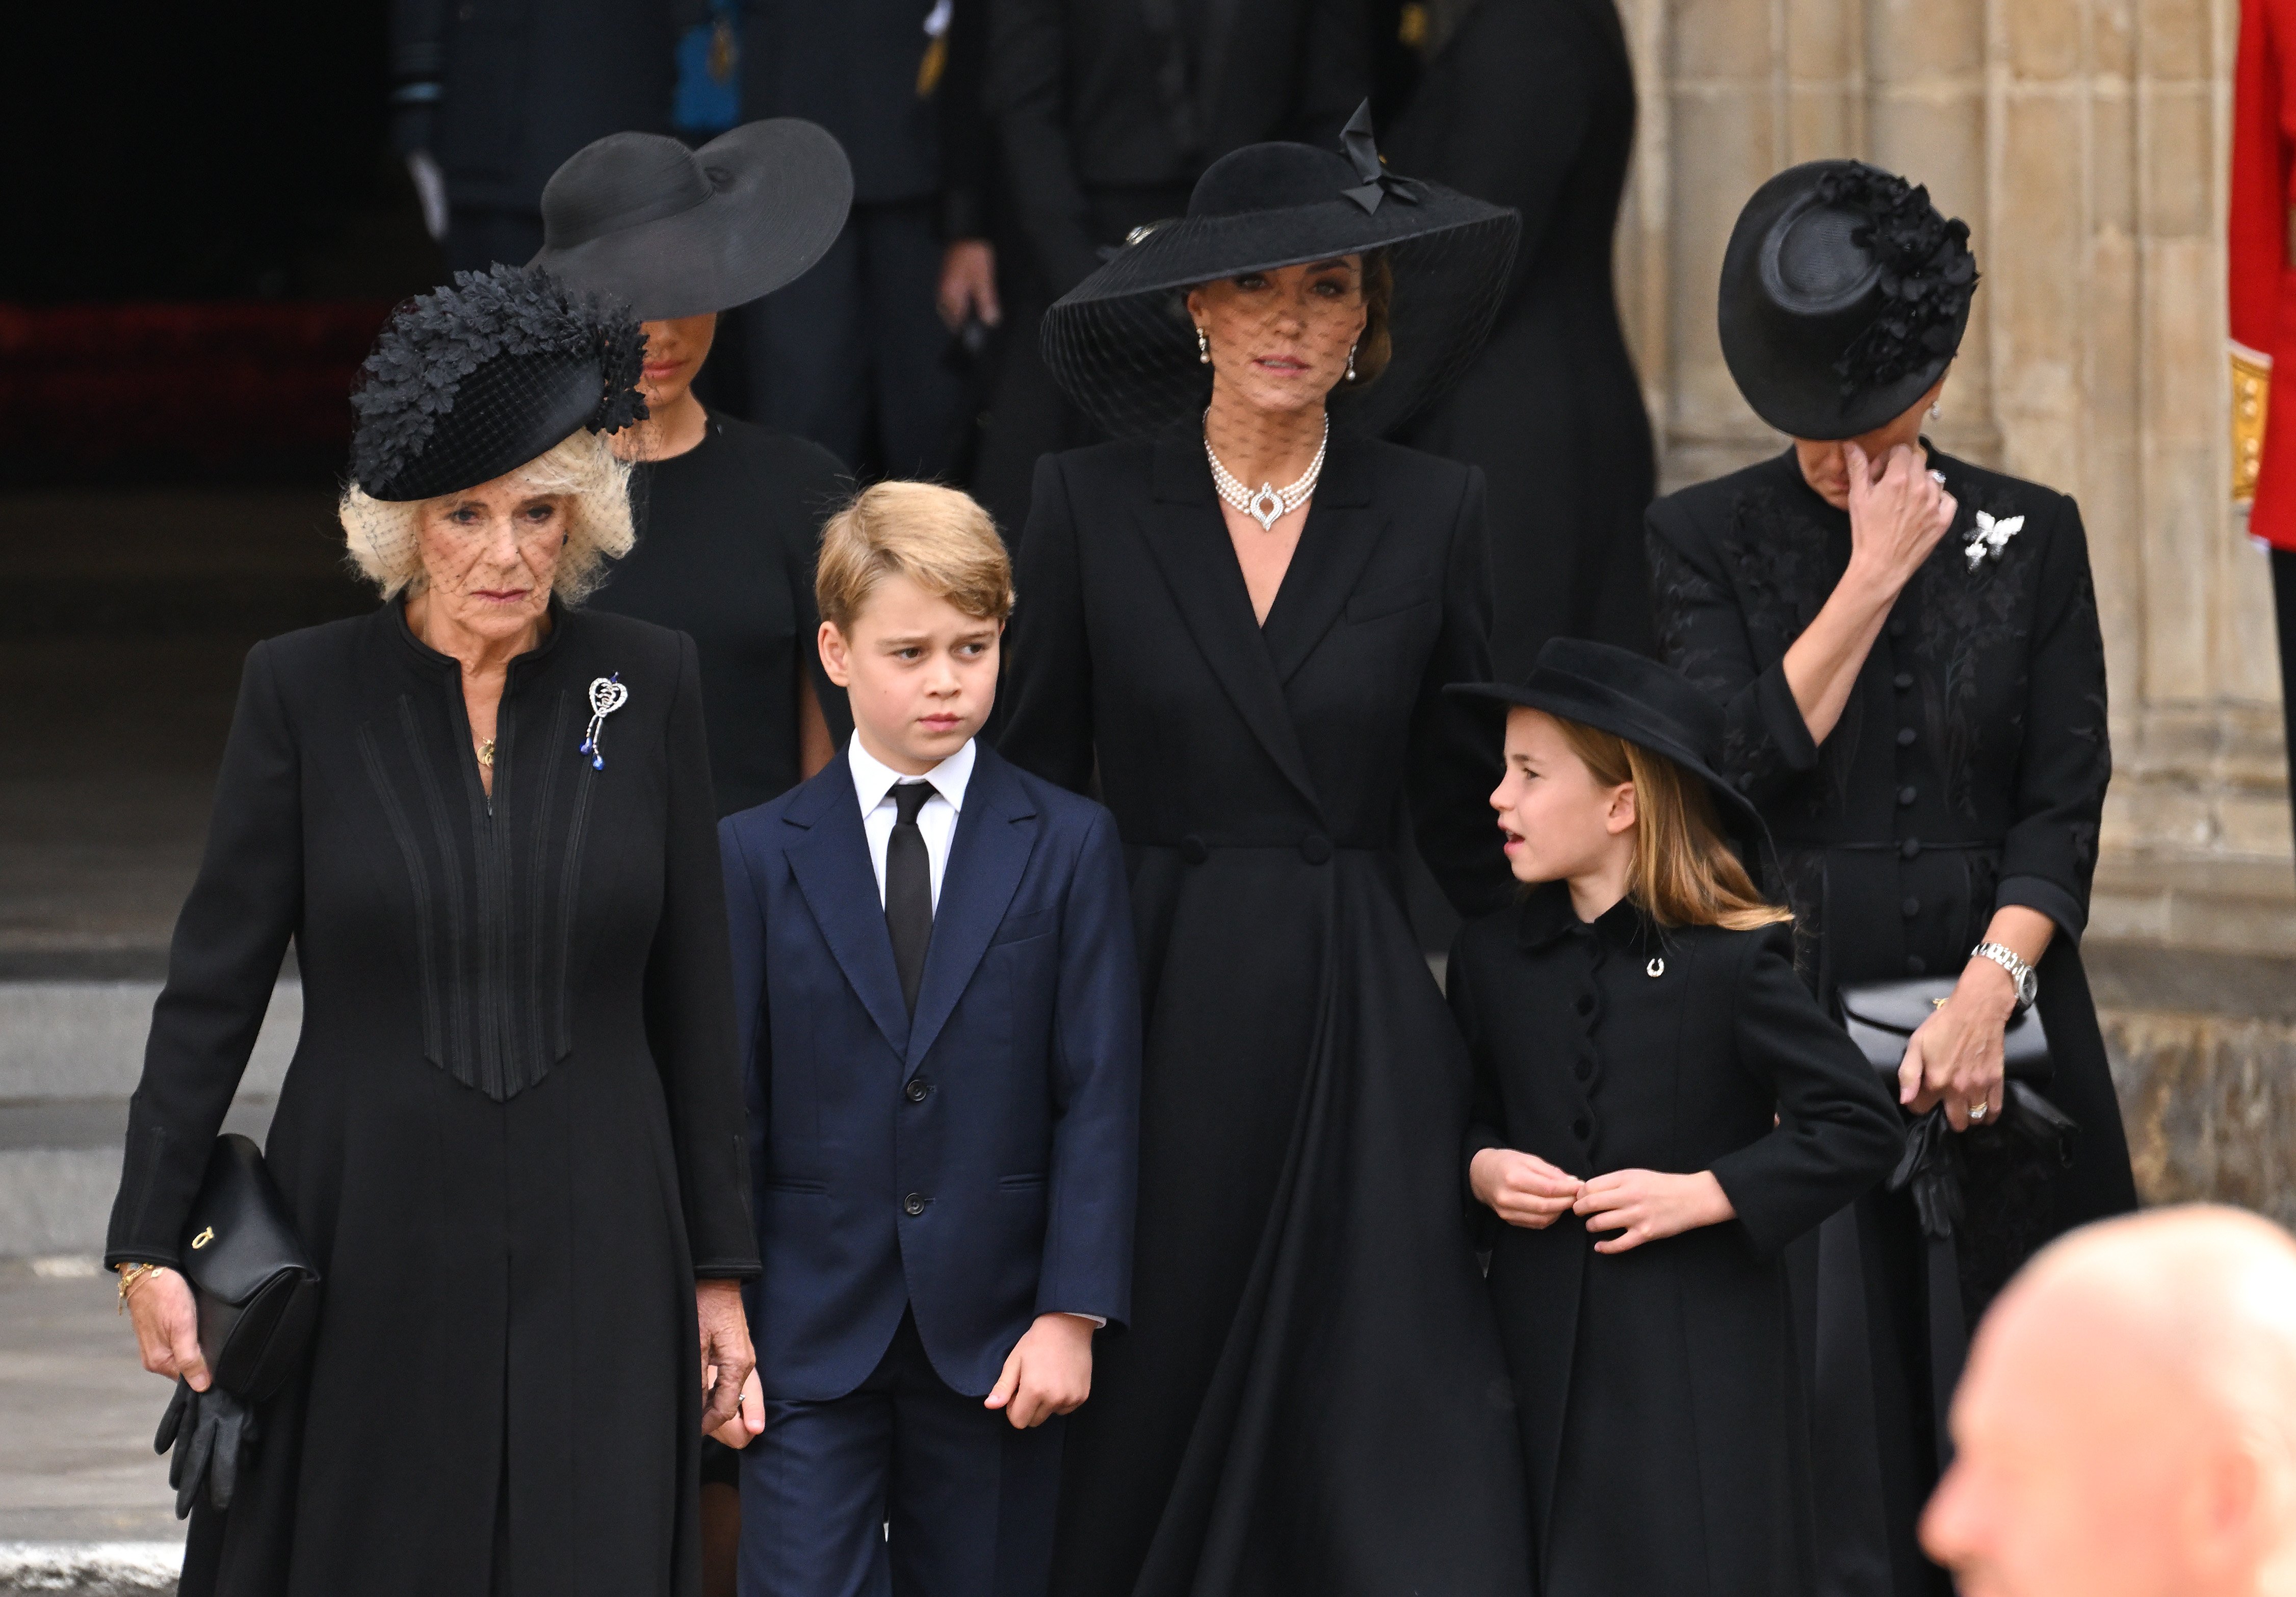 Camilla, Queen Consort, Prince George, Catherine, Princess Charlotte and Sophie, during the State Funeral of Queen Elizabeth II at Westminster Abbey on September 19, 2022 in London, England | Source: Getty Images